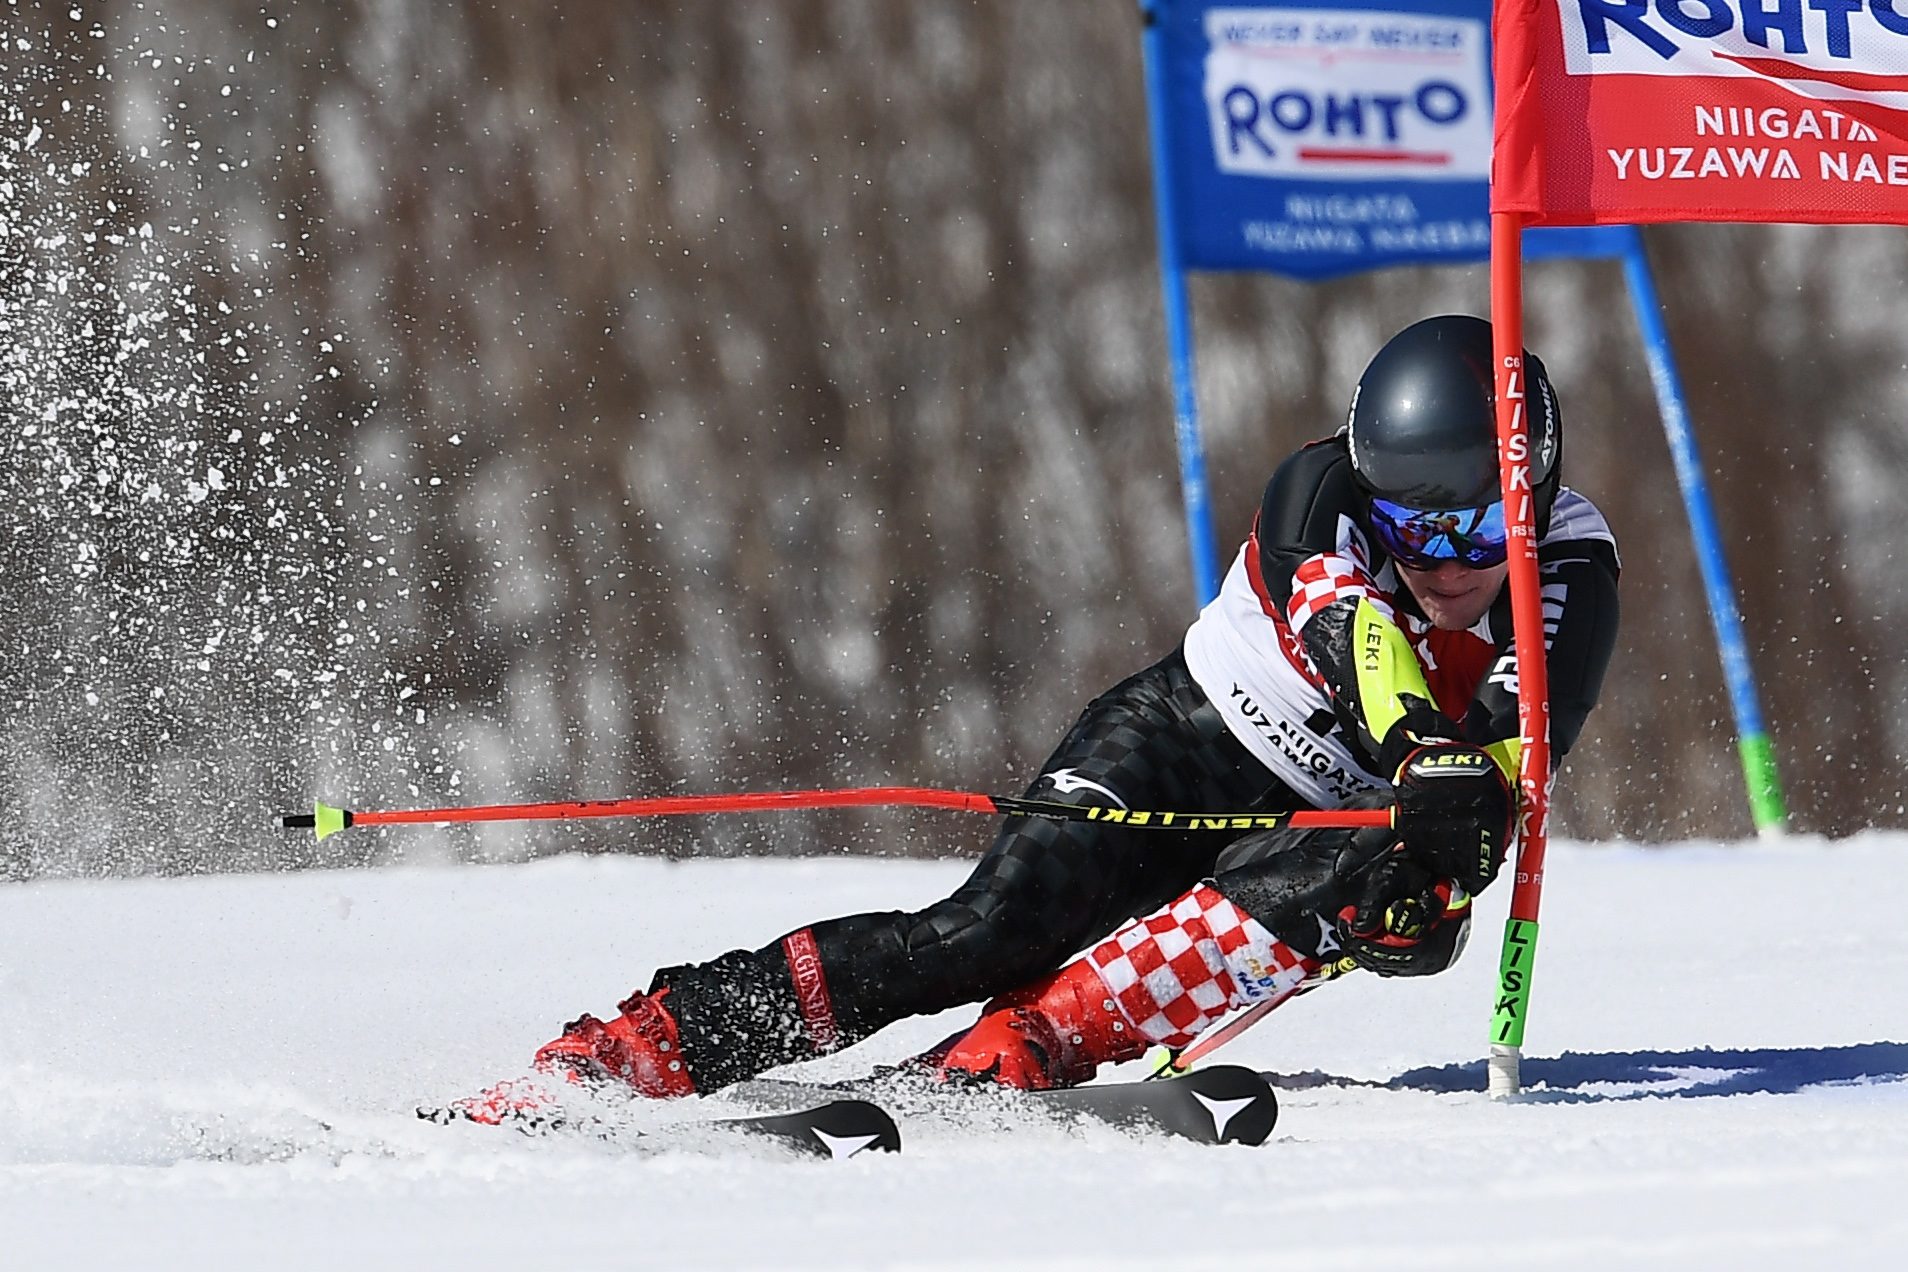 Filip Zubcic of Austria competes during the Audi FIS Alpine Ski World Cup Men's Giant Slalom on February 22, 2020 in Yuzawa Naeba, western Japan. (Photo by CHARLY TRIBALLEAU / AFP)